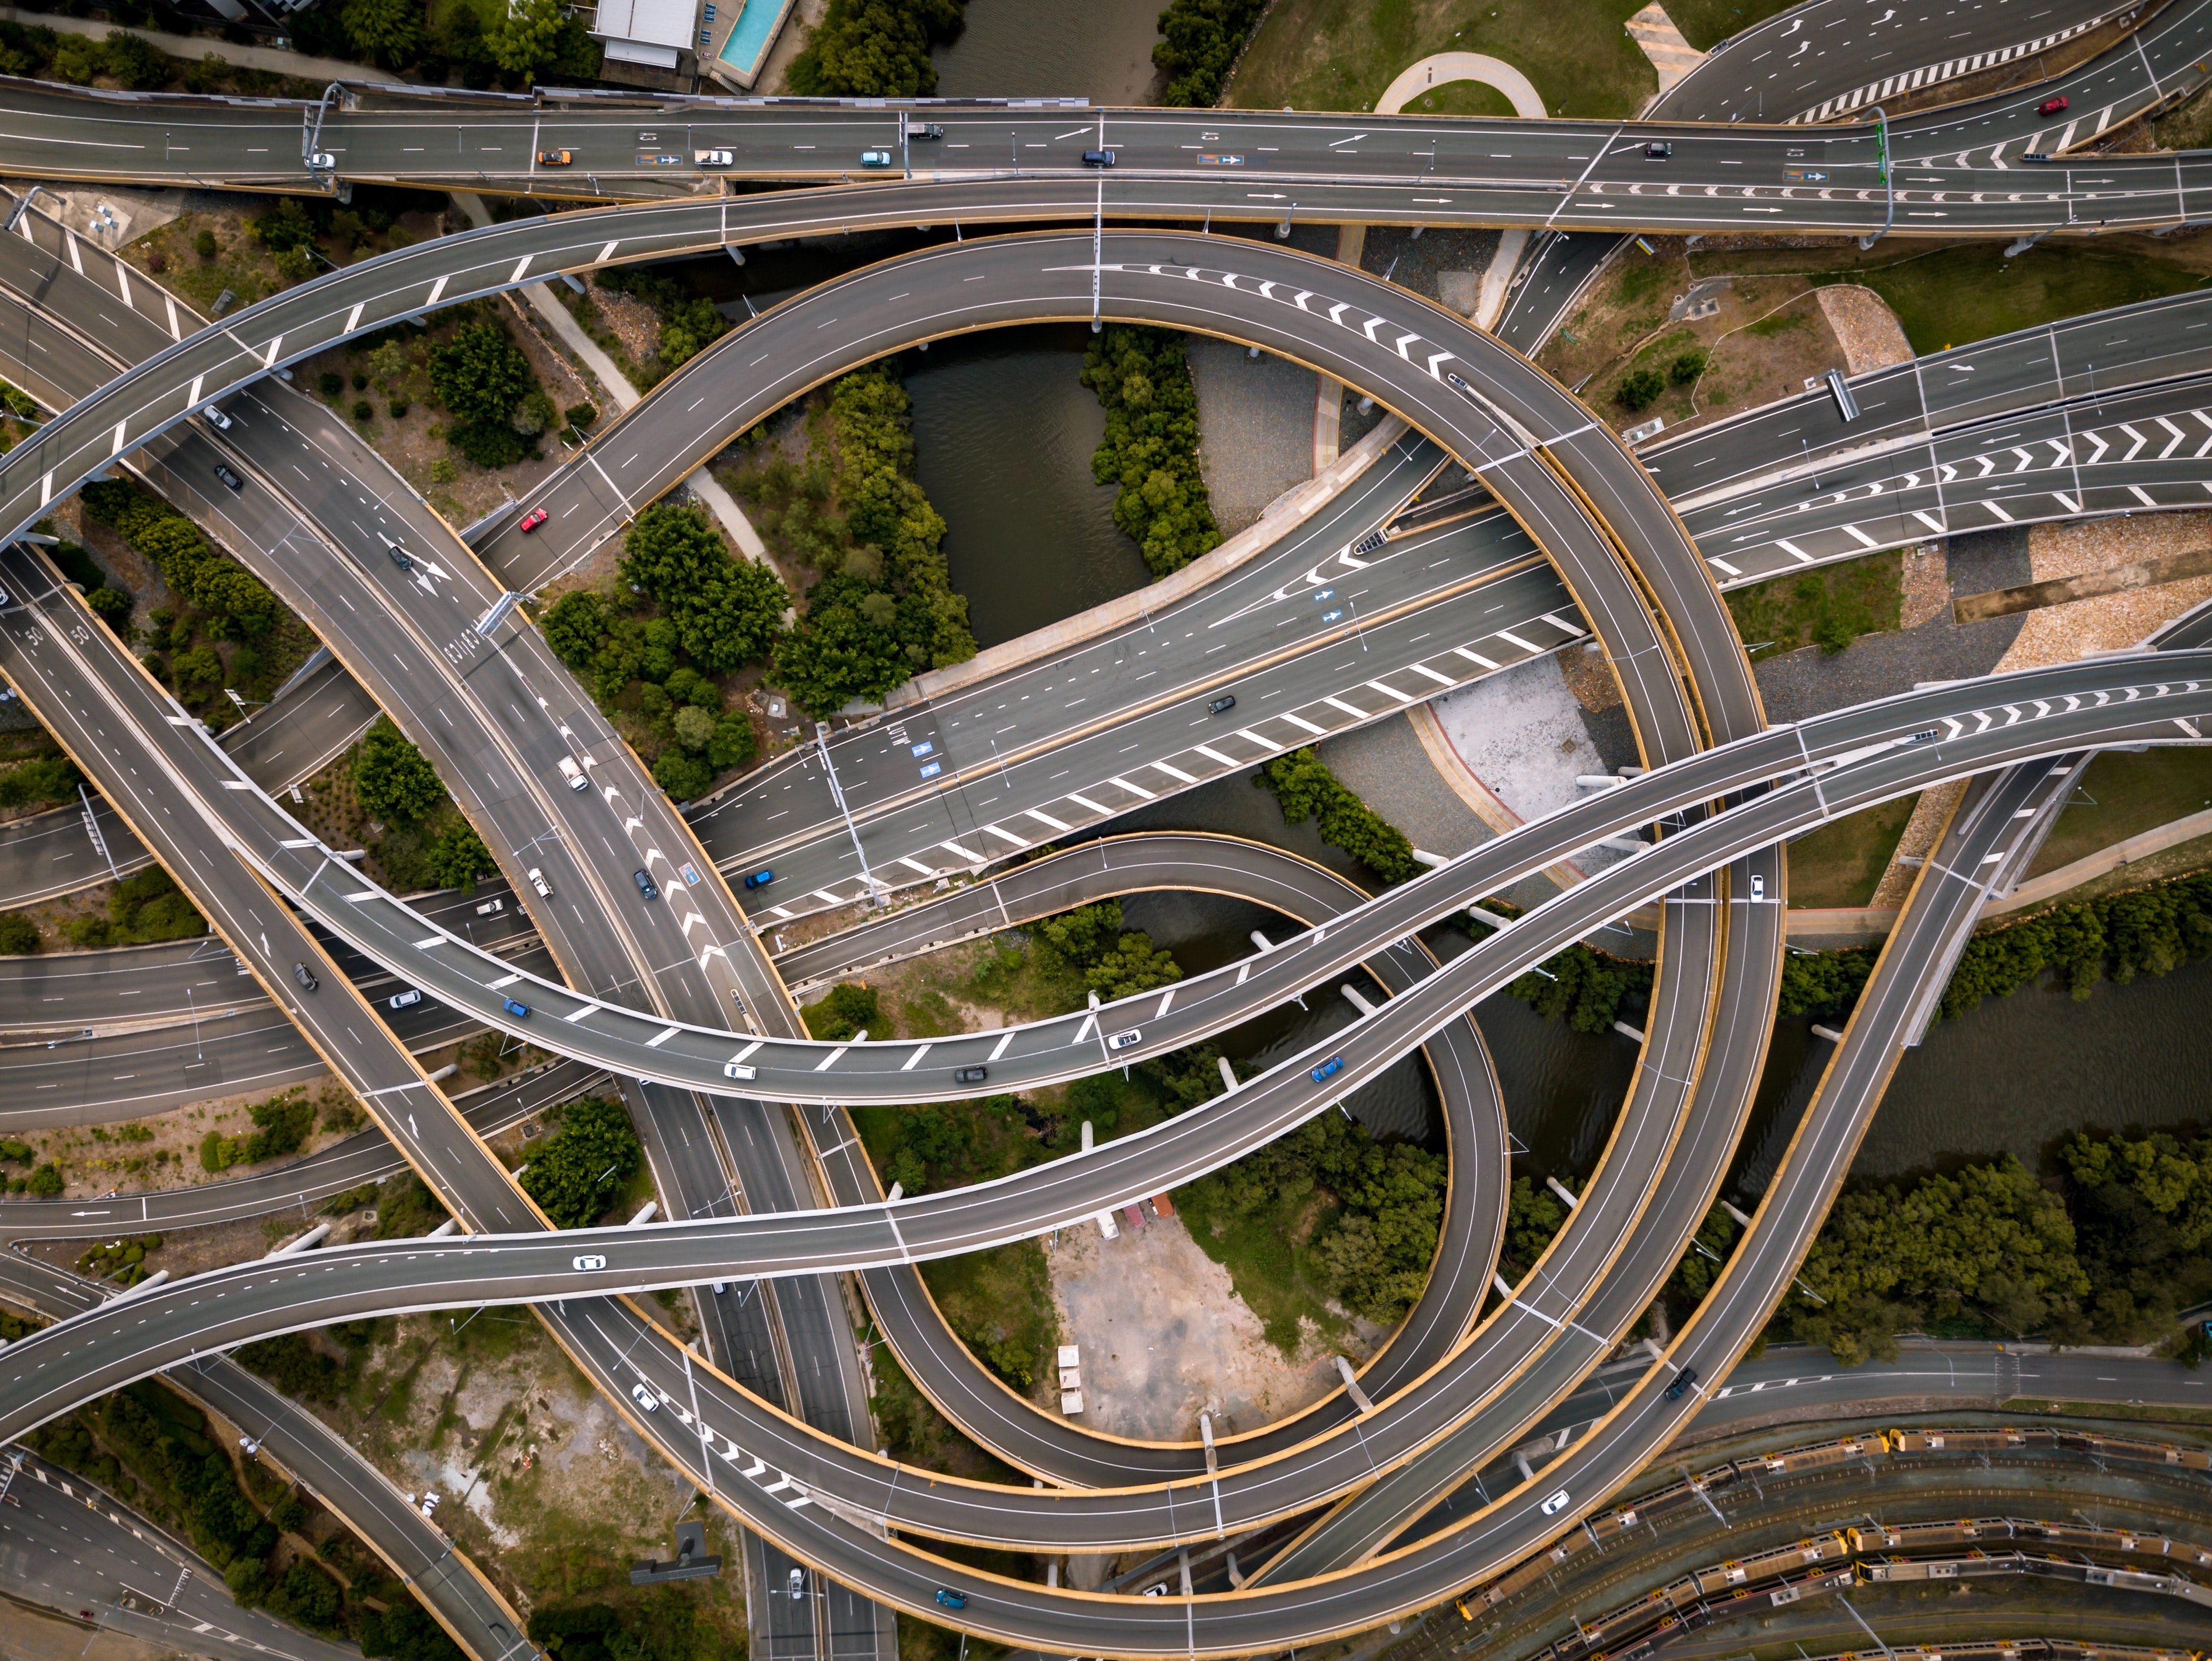 Aerial view of a complex, winding highway system.